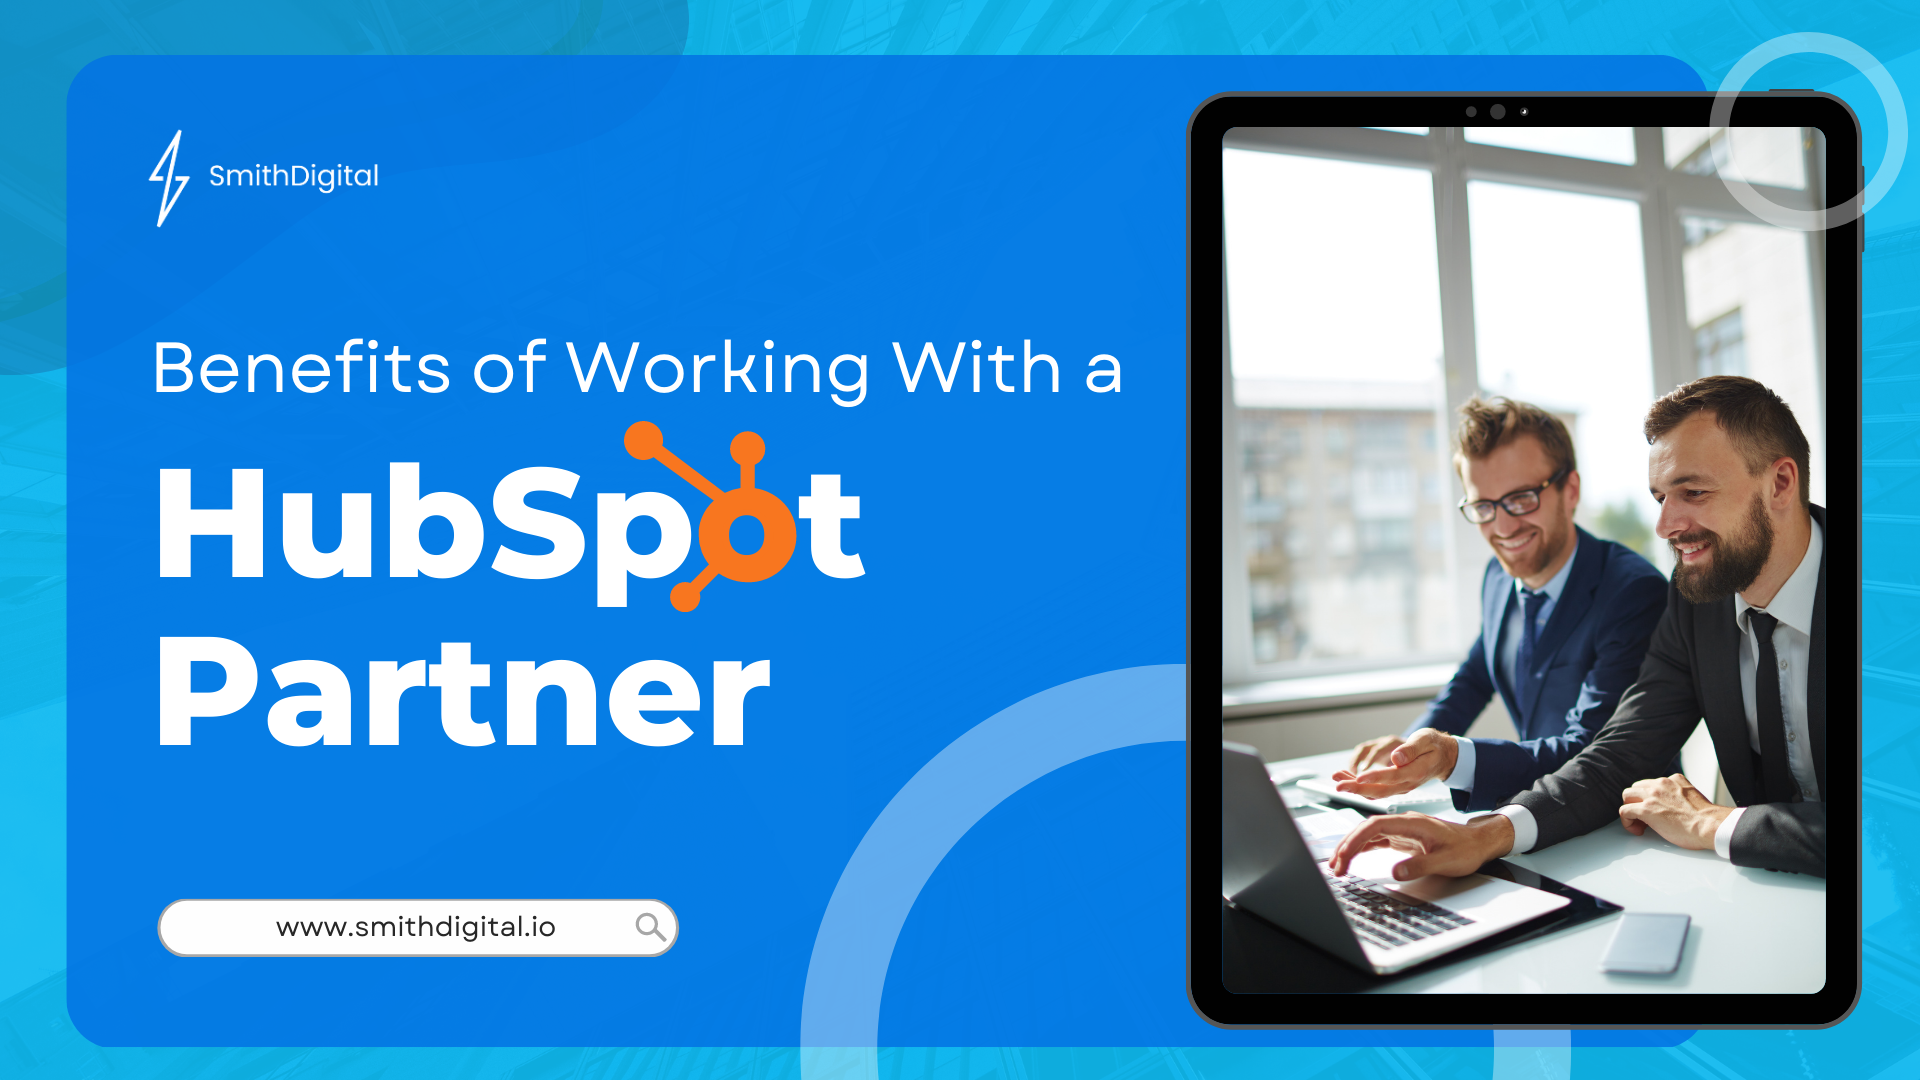 Benefits of Working with HubSpot Partner vs Going Direct